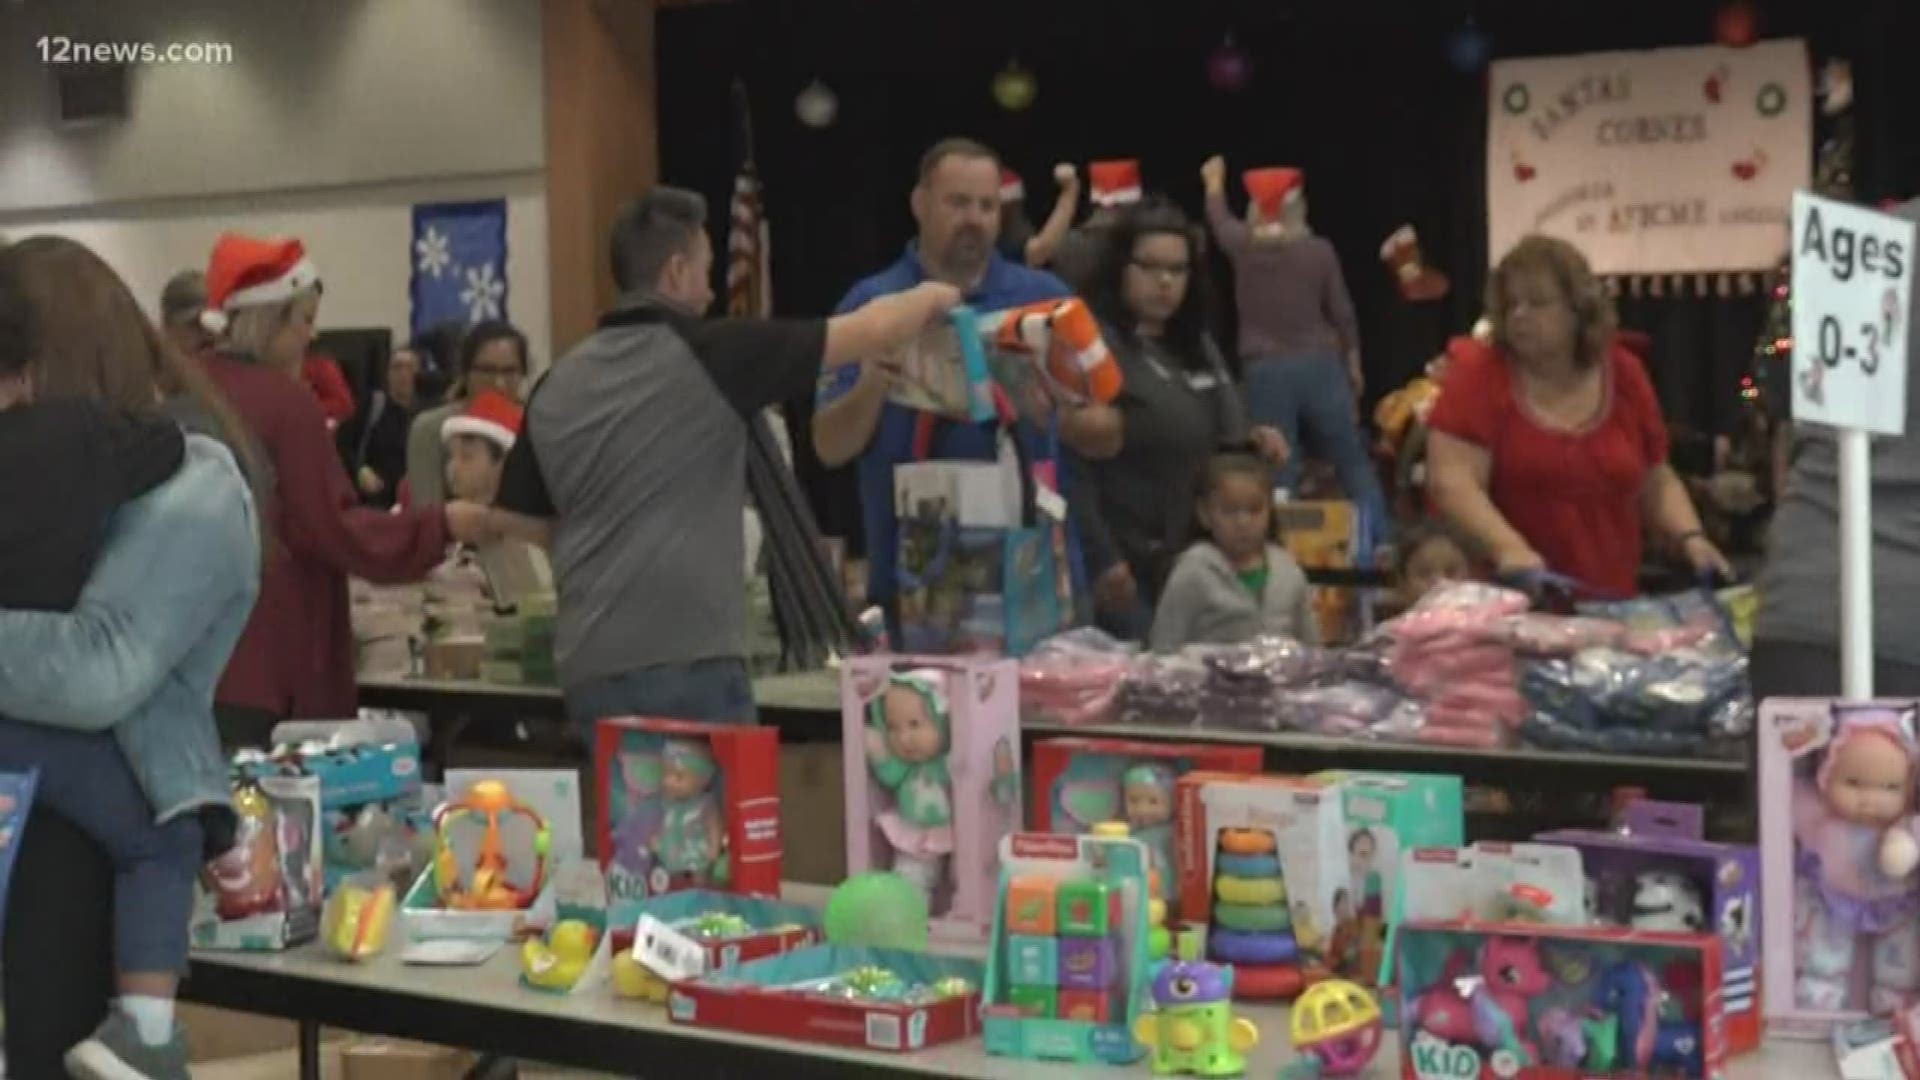 Hundreds, if not thousands, of people showed up for a day of giving at Peoria Community Center.